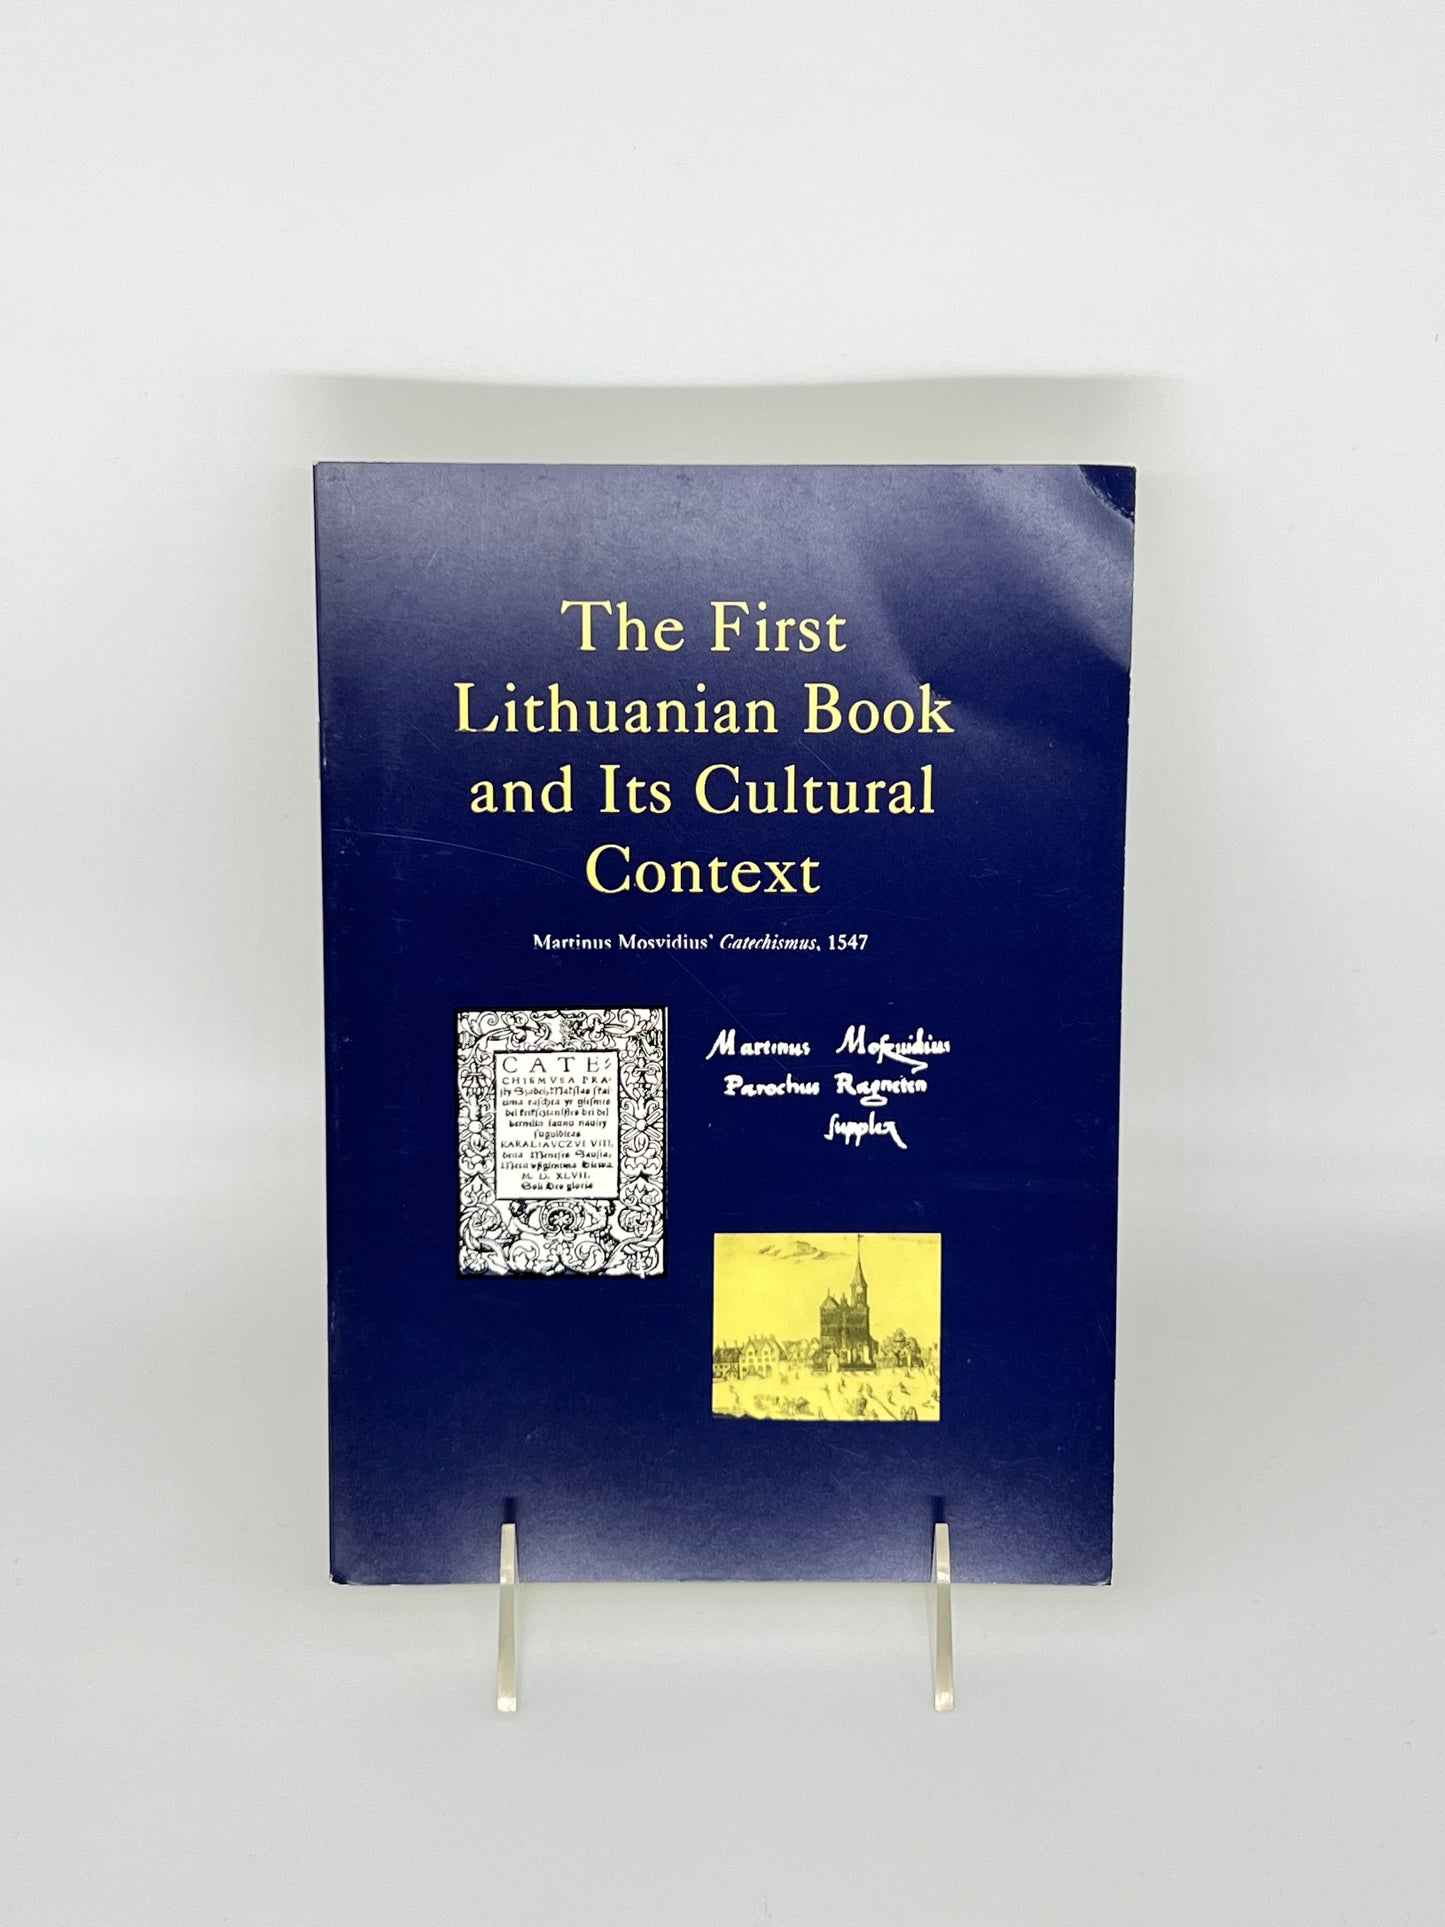 The First Lithuanian Book and Its Cultural Context